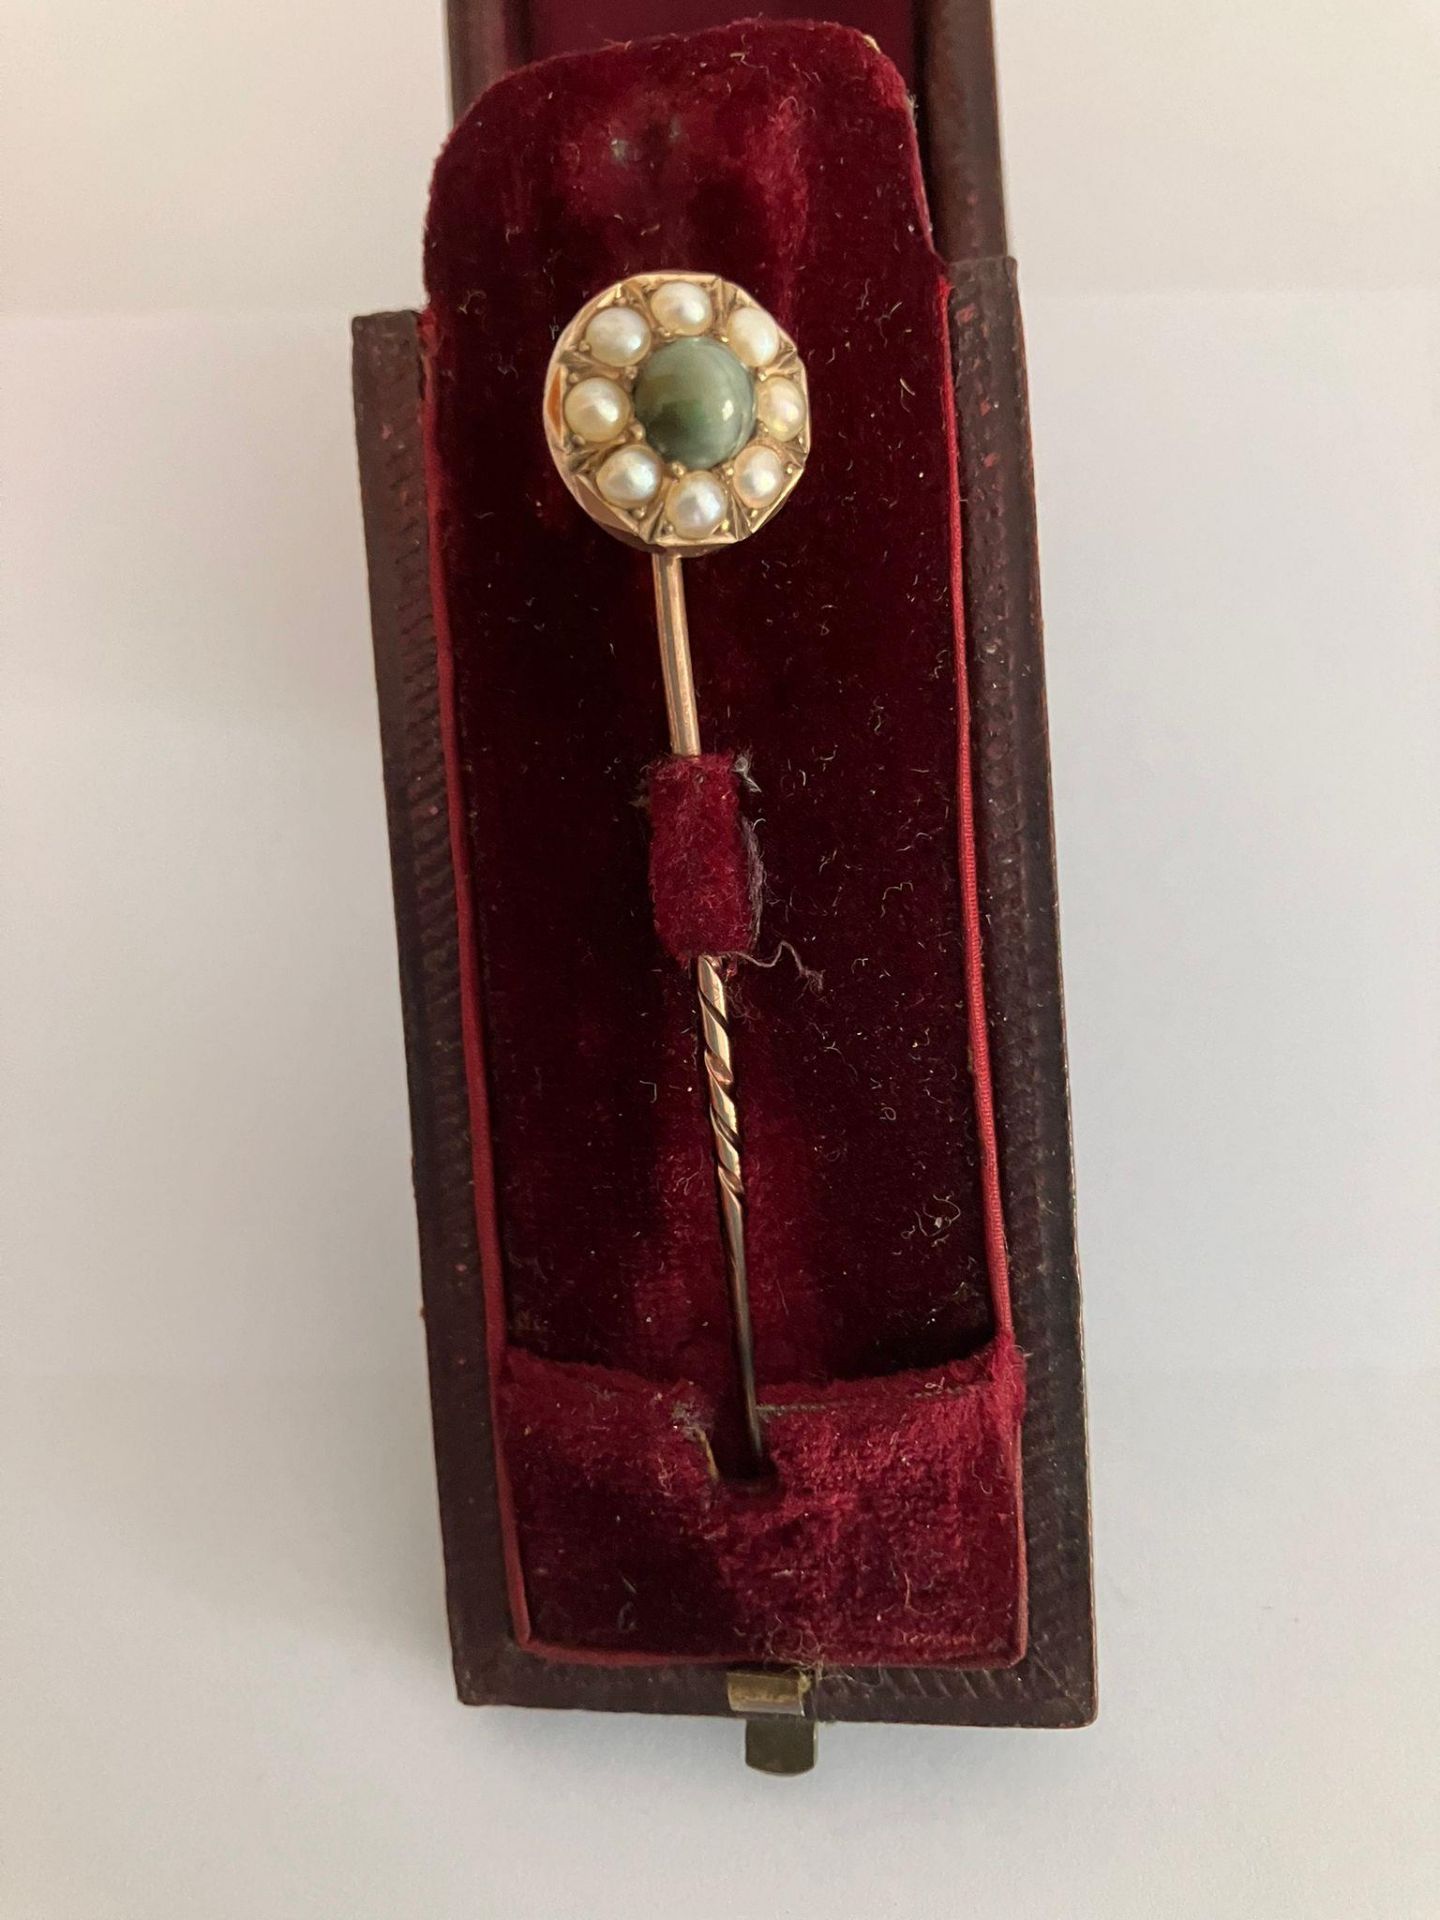 Antique GOLD TIE PIN Set with AGATE and PEARLS. Complete with original case. 2.5 grams.